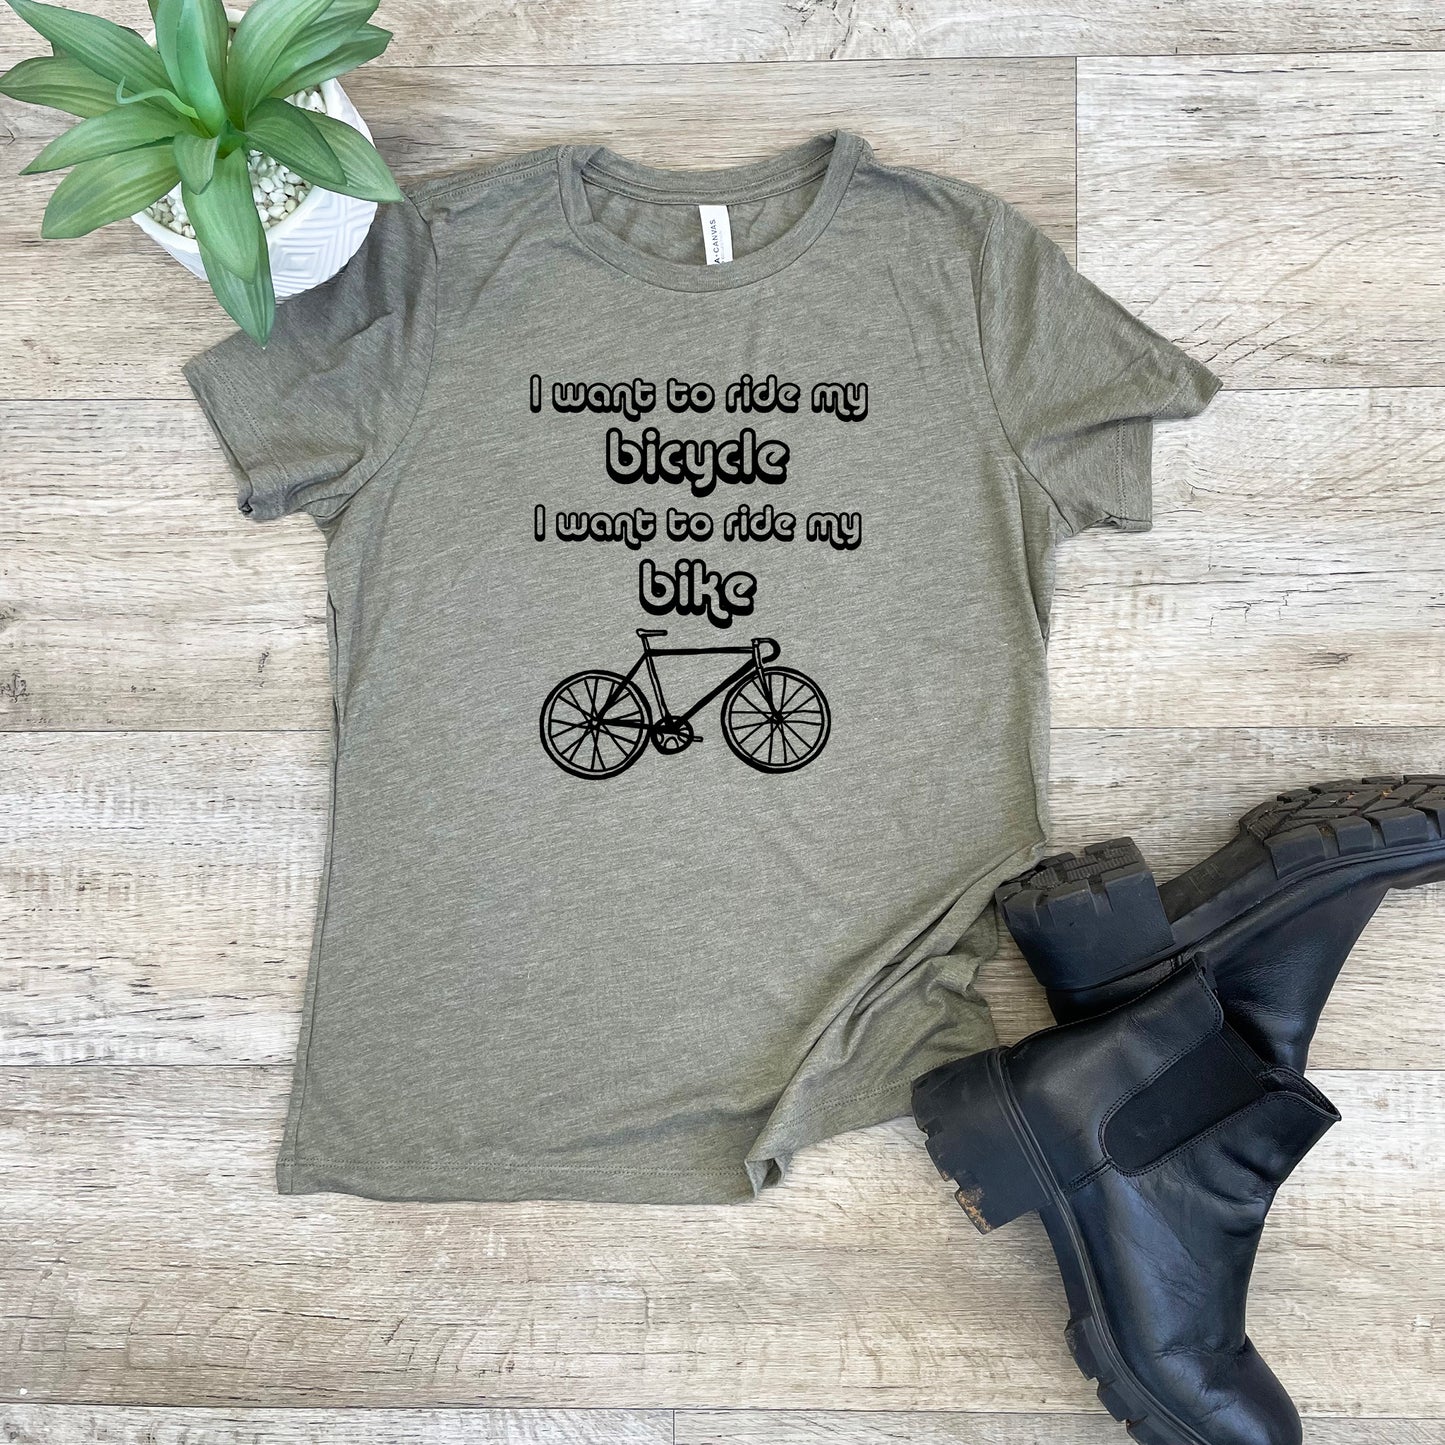 I Want To Ride My Bicycle, I Want To Ride My Bike - Women's Crew Tee - Olive or Dusty Blue